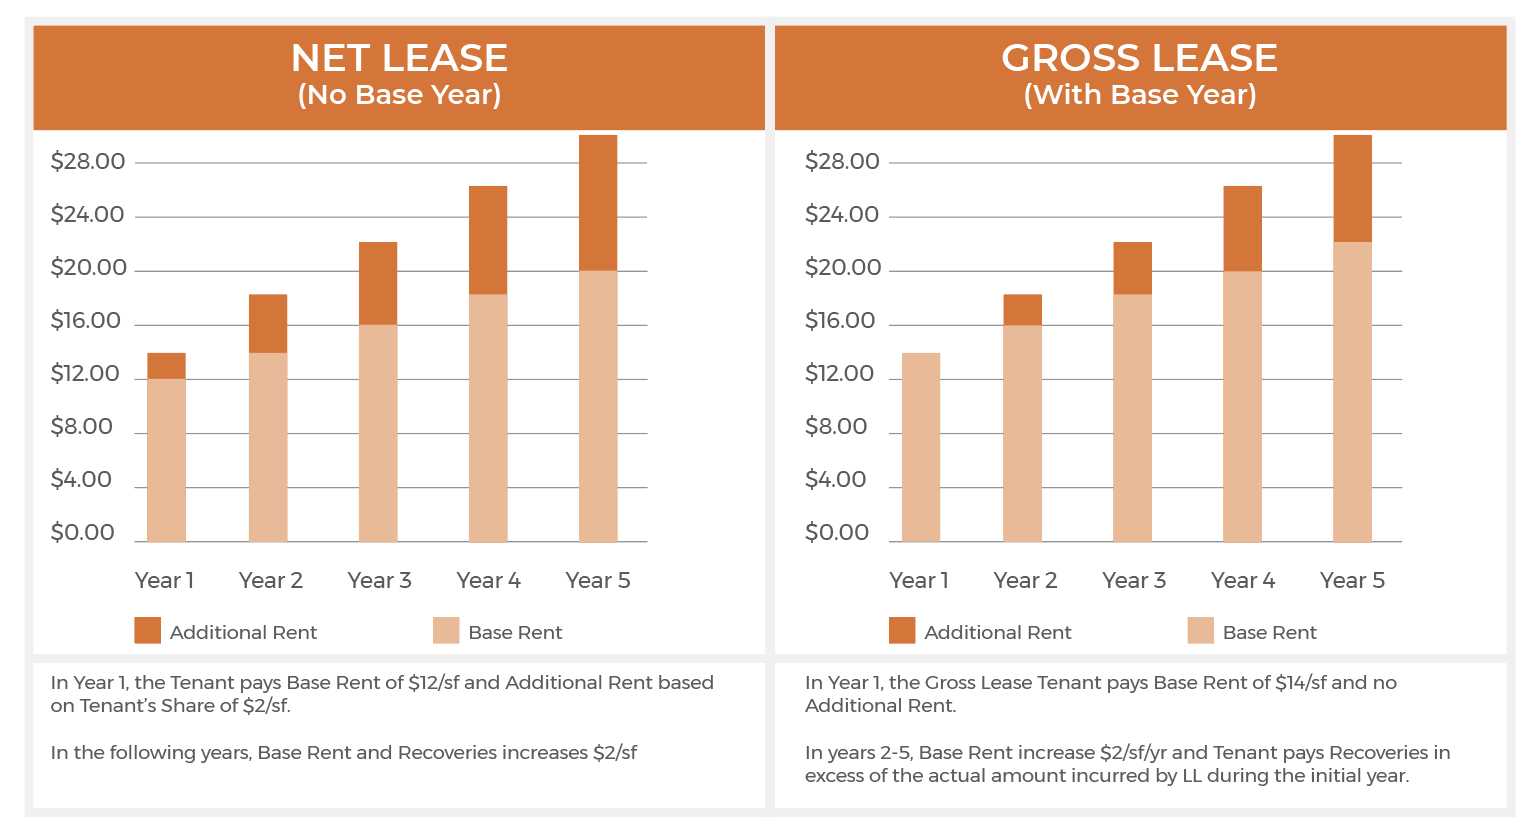 Net Lease and Gross Lease